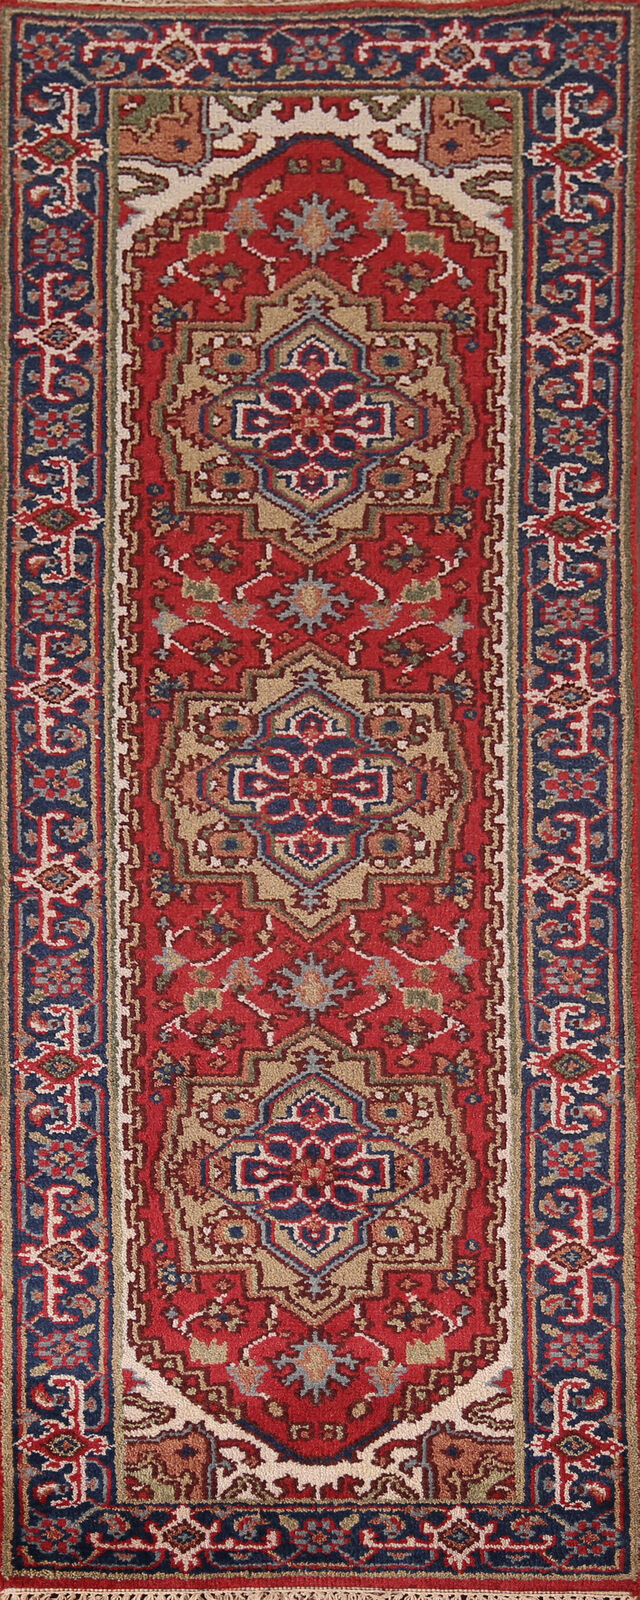 Exquisite Traditional Hand-Knotted Heriz Serapi Indian Wool Runner Rug 3x8 ft.